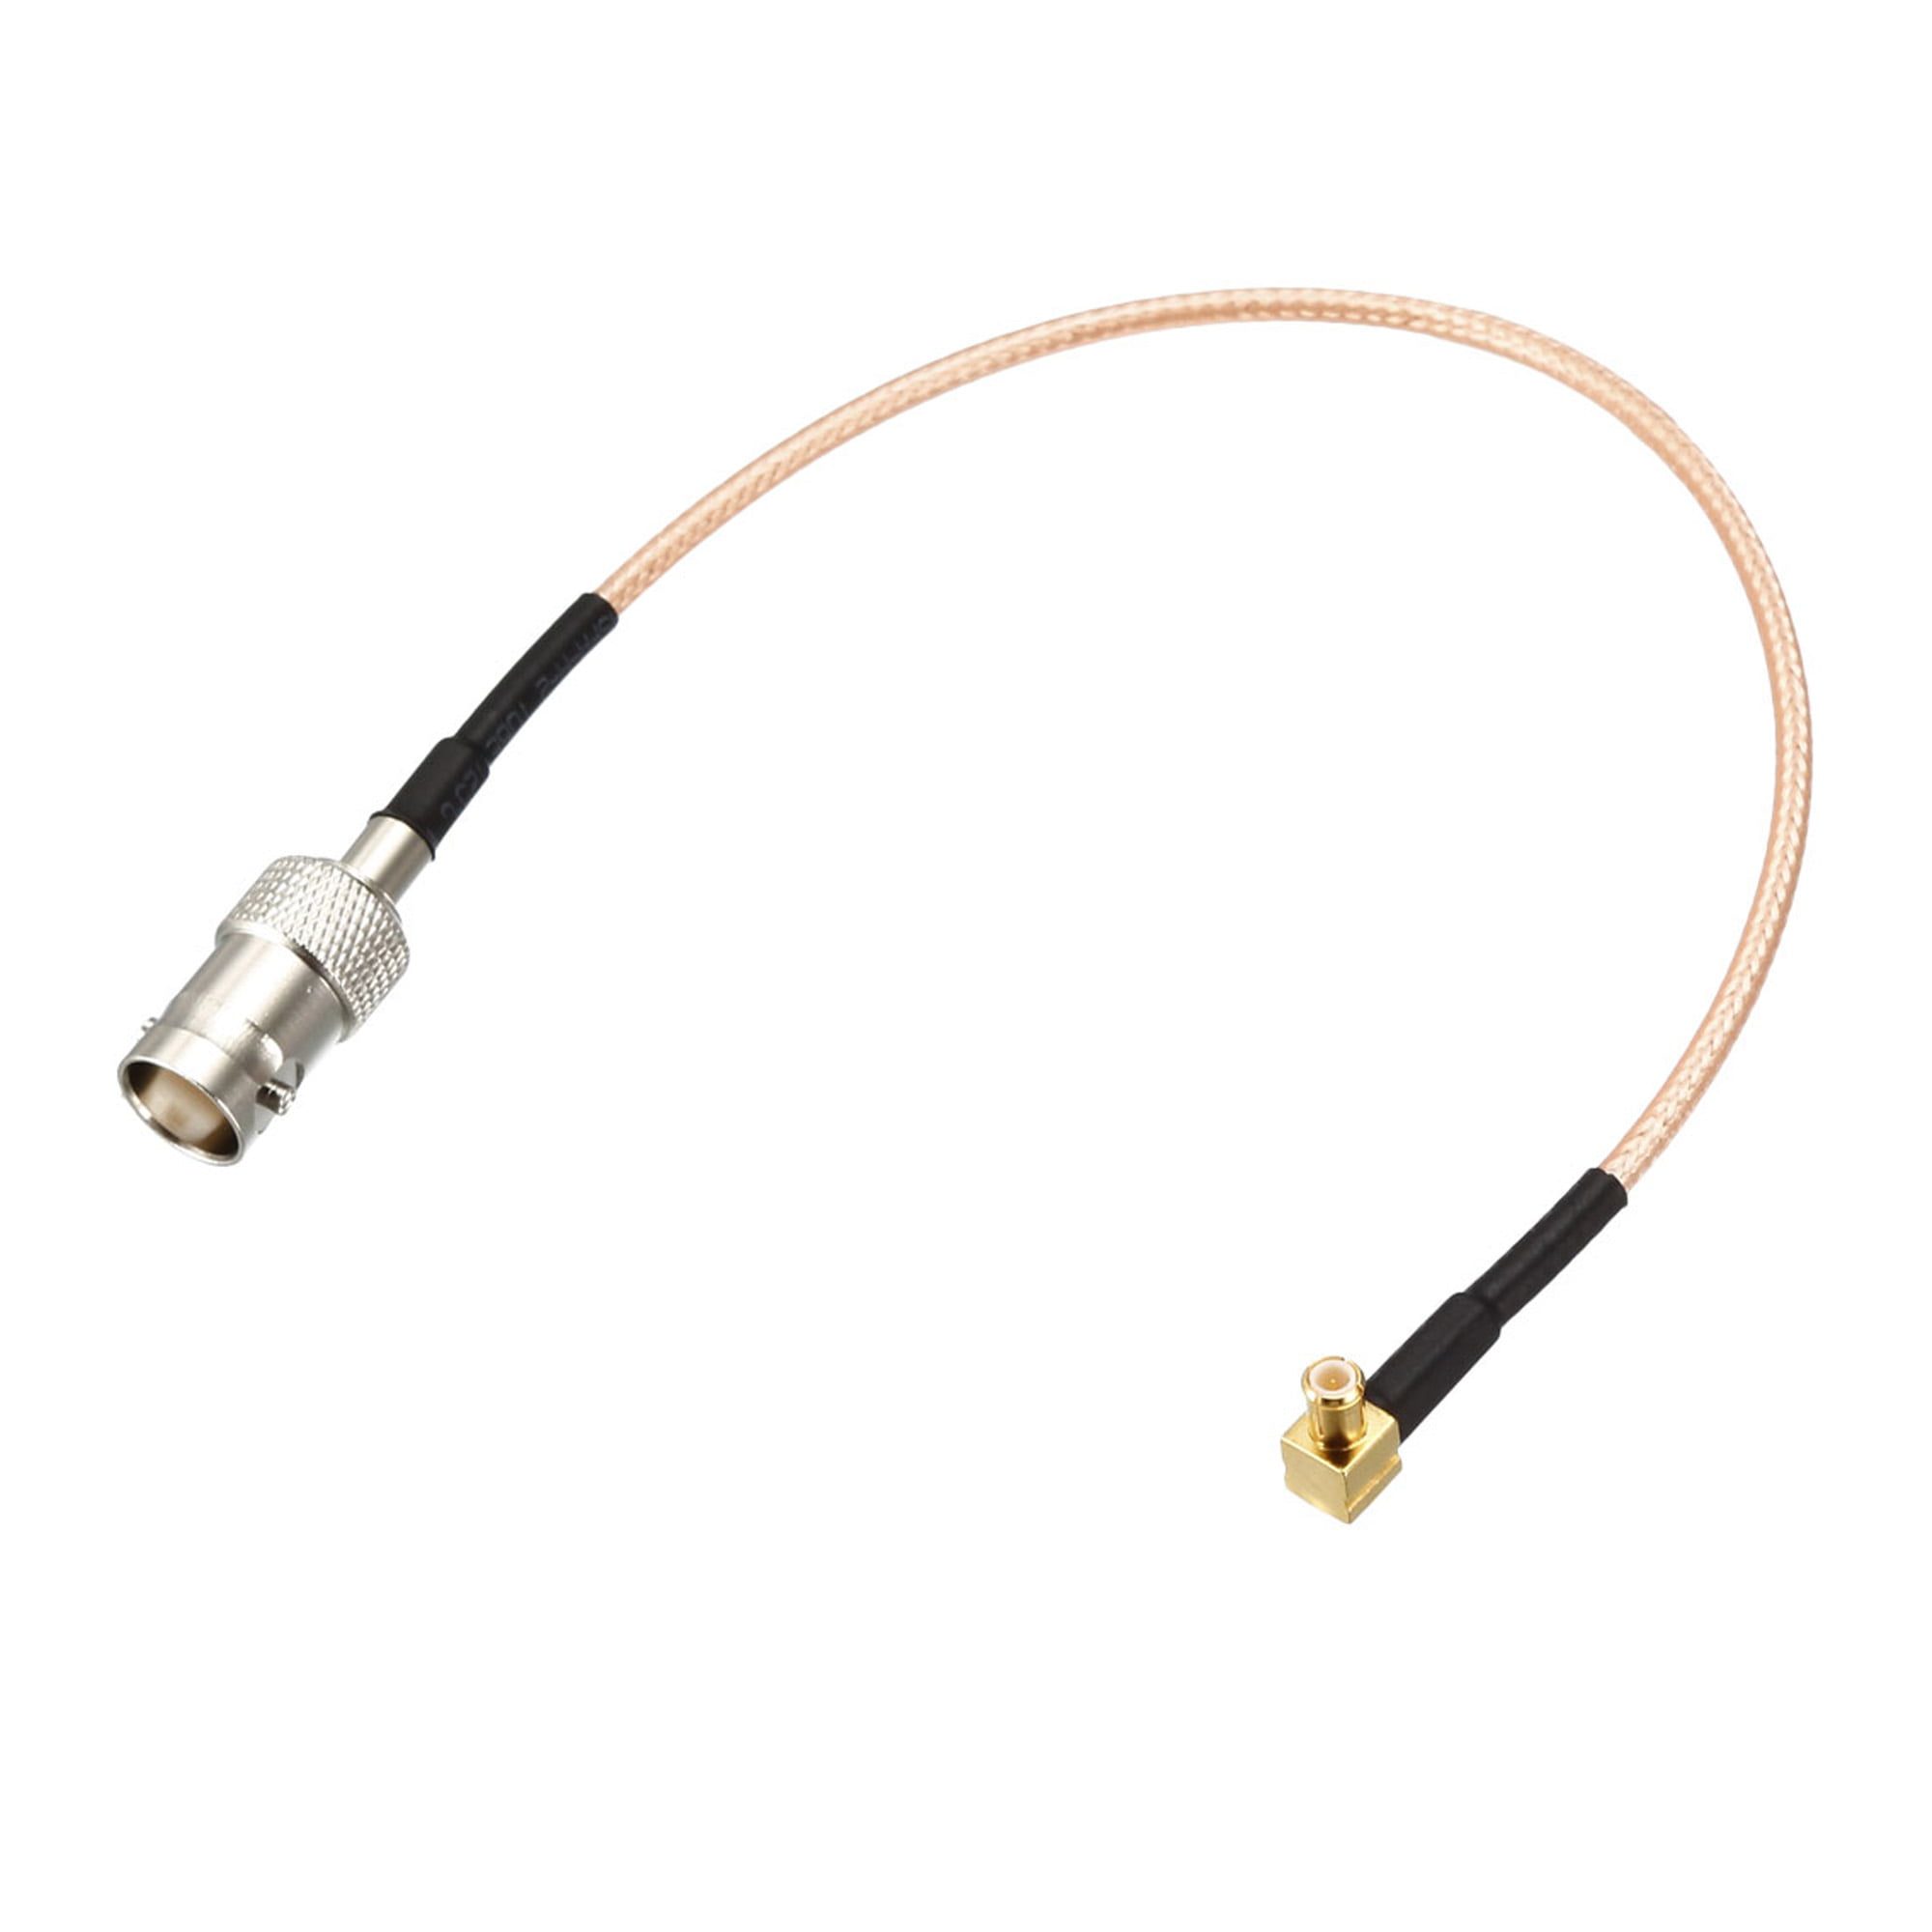 USA-CA RG316 RCA FEMALE to MCX MALE ANGLE Coaxial RF Pigtail Cable 